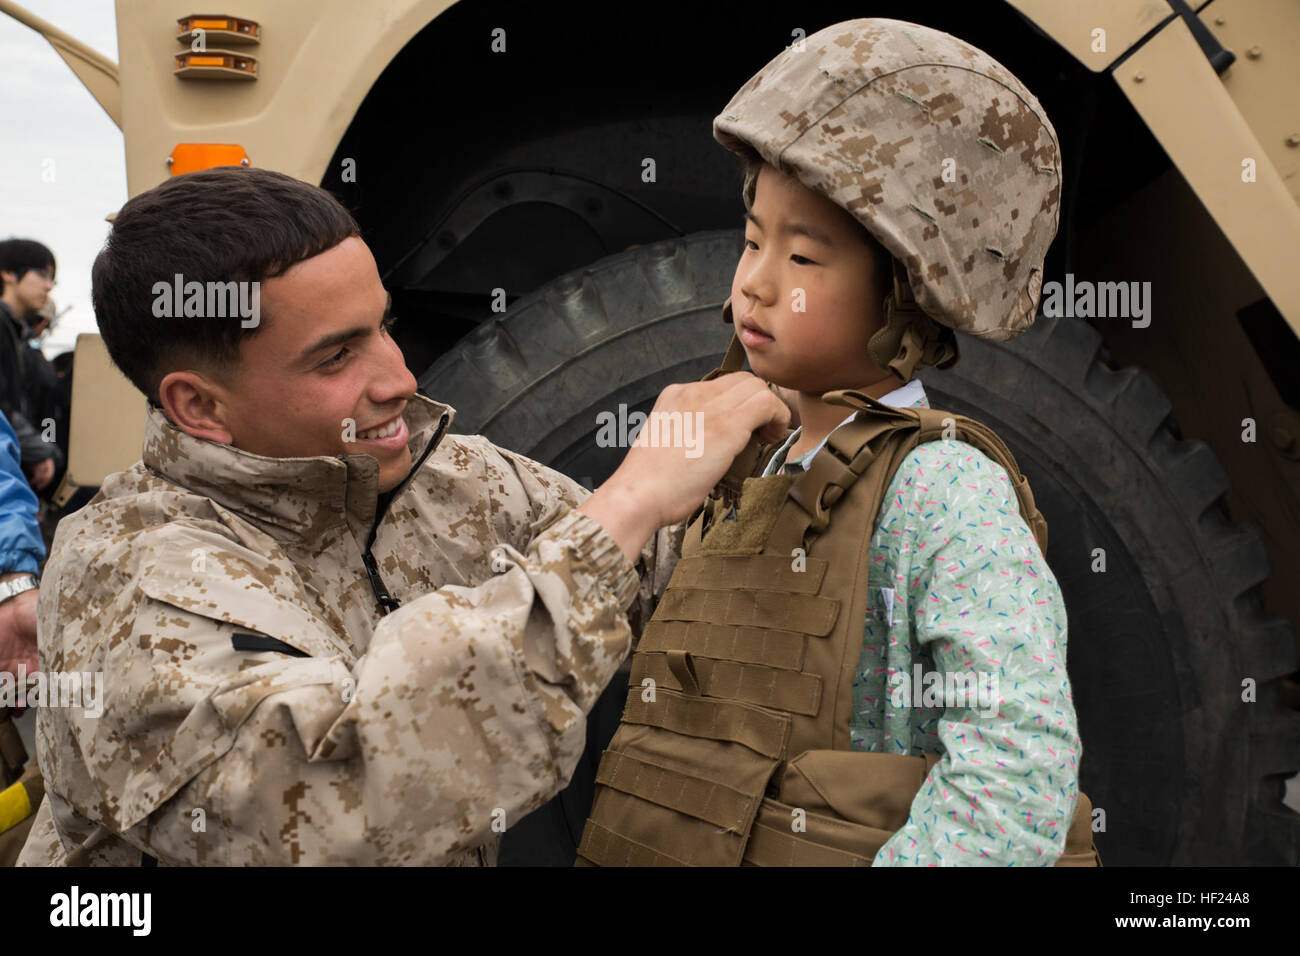 Cpl. Jose Escribano puts a Kevlar helmet onto a Japanese boy during Friendship Day at Marine Corps Air Station Iwakuni, Japan, May 5, 2014. Escrinao is a motor transportation operator with Marine Wing Support Squadron 171, and was just one of the many Marine that helped host more than 50,000 visitors. Friendship day is an event that allows Japanese citizens a chance to see military vehicles and aircraft, meet American service members, and get a taste of American culture. MCAS Iwakuni hosts Friendship Day 2014 140505-M-ZV462-013 Stock Photo